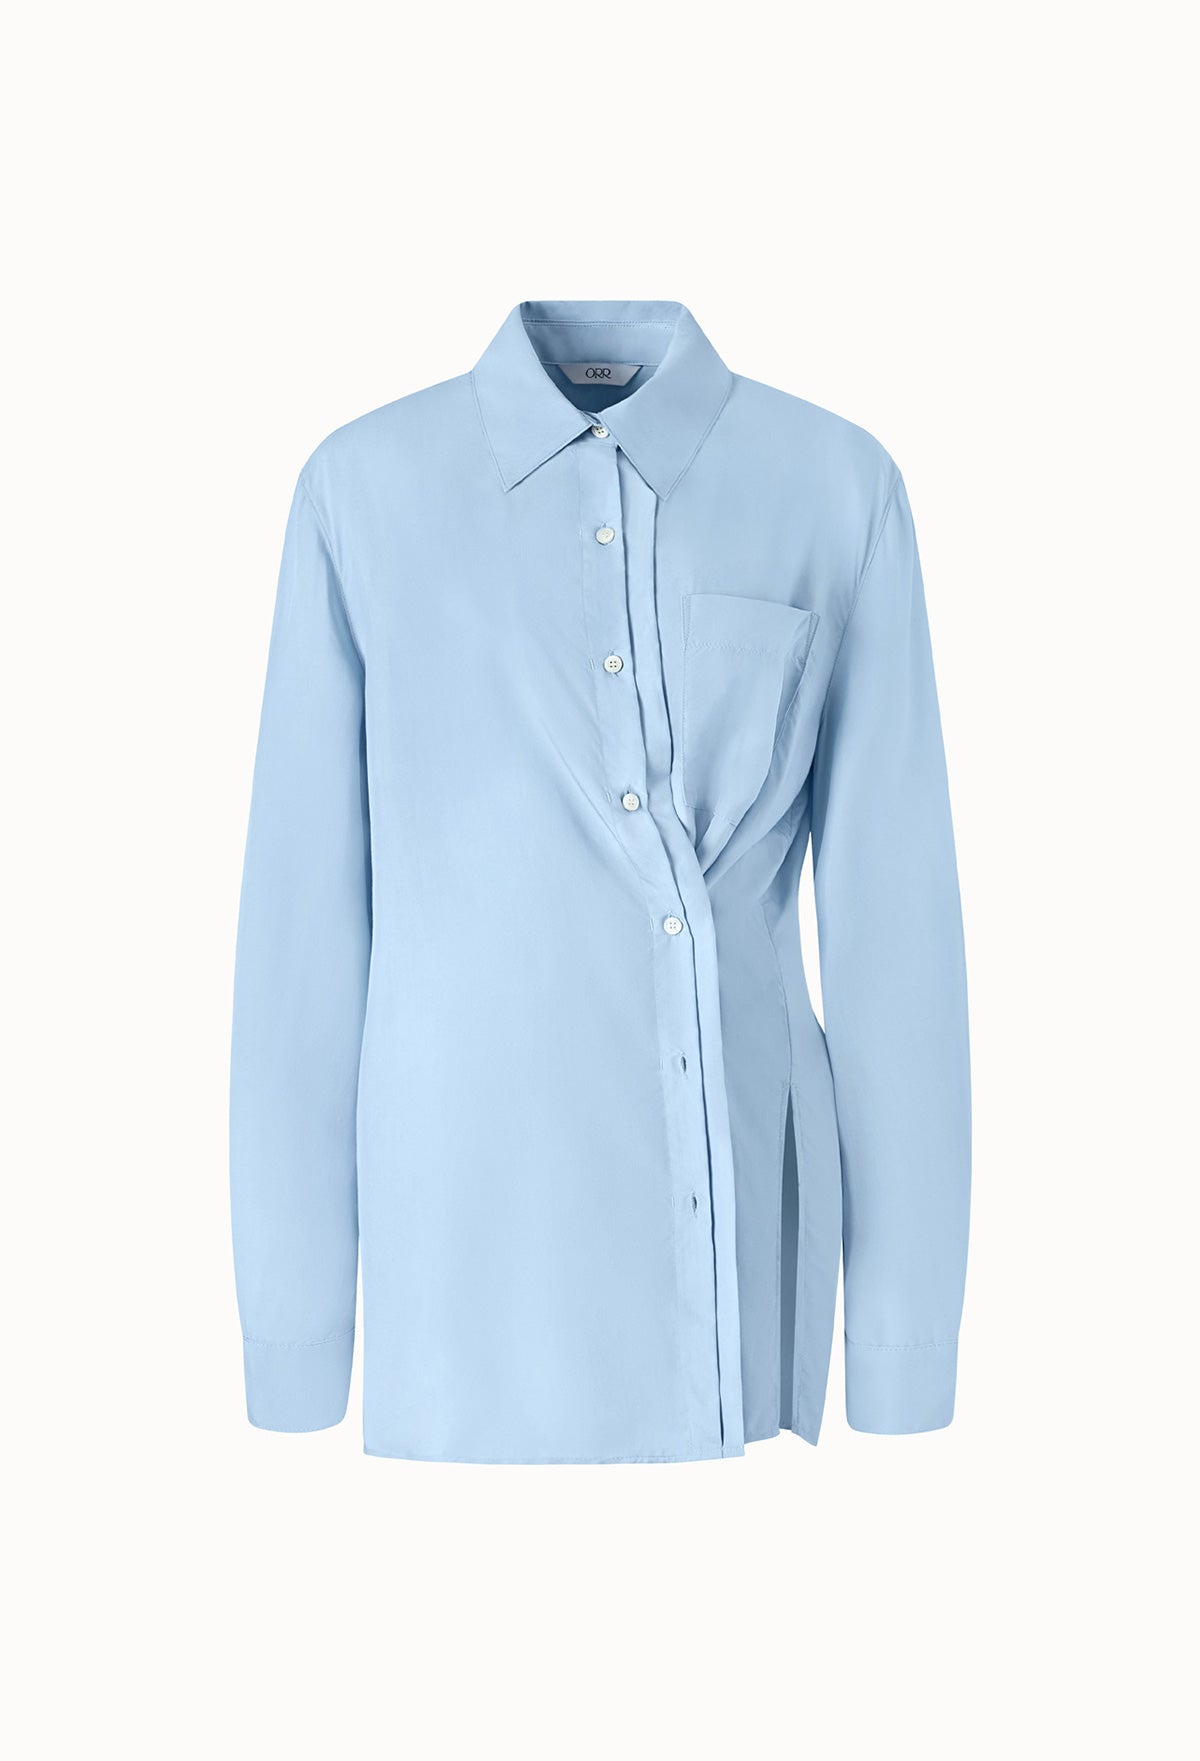 Double Placket Shirt In Light Blue